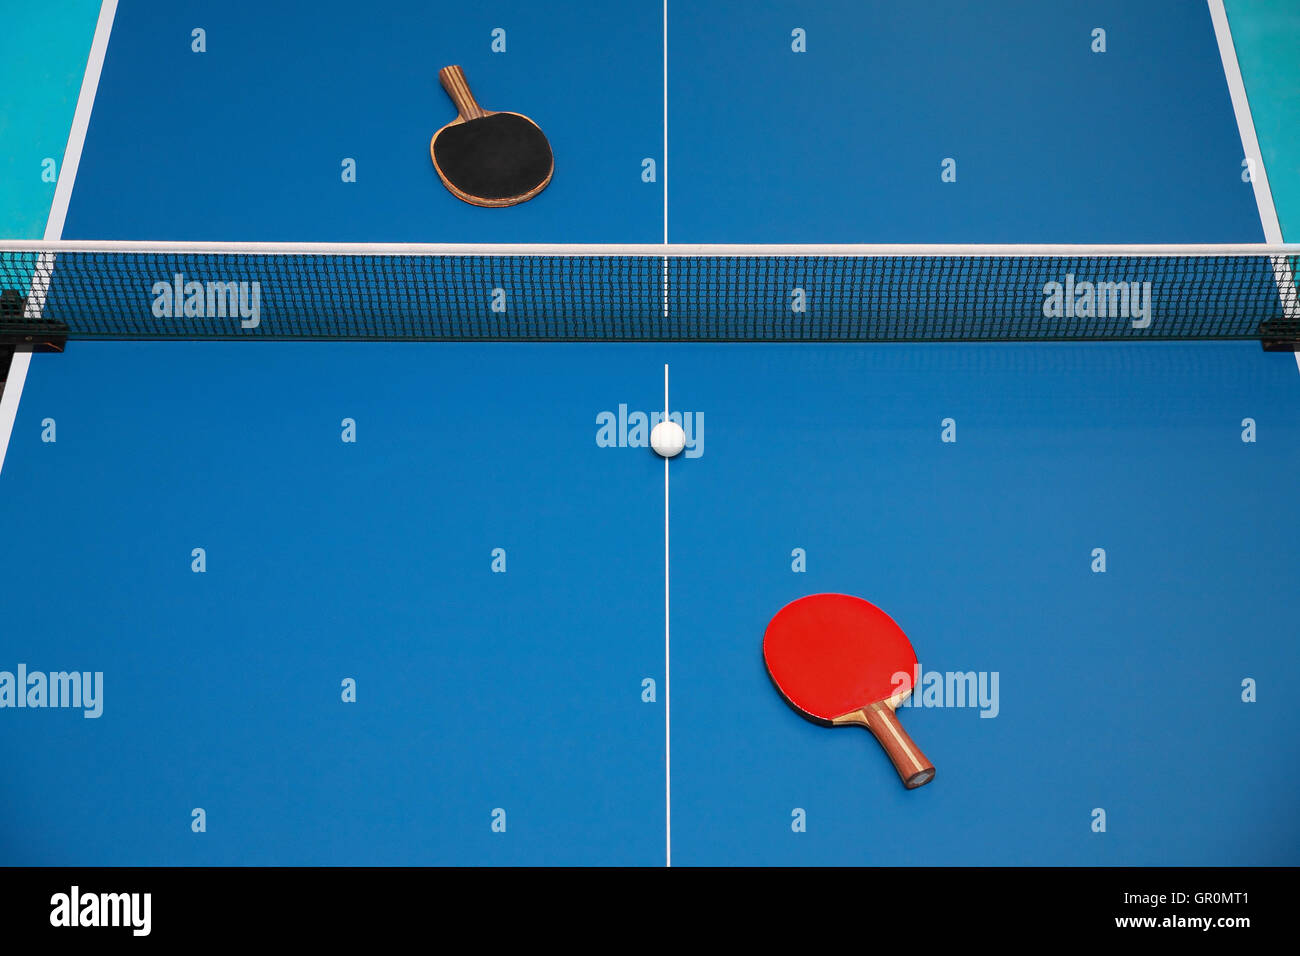 Rackets for blue table tennis of red and  black color and a ball on a tennis table, view from above Stock Photo